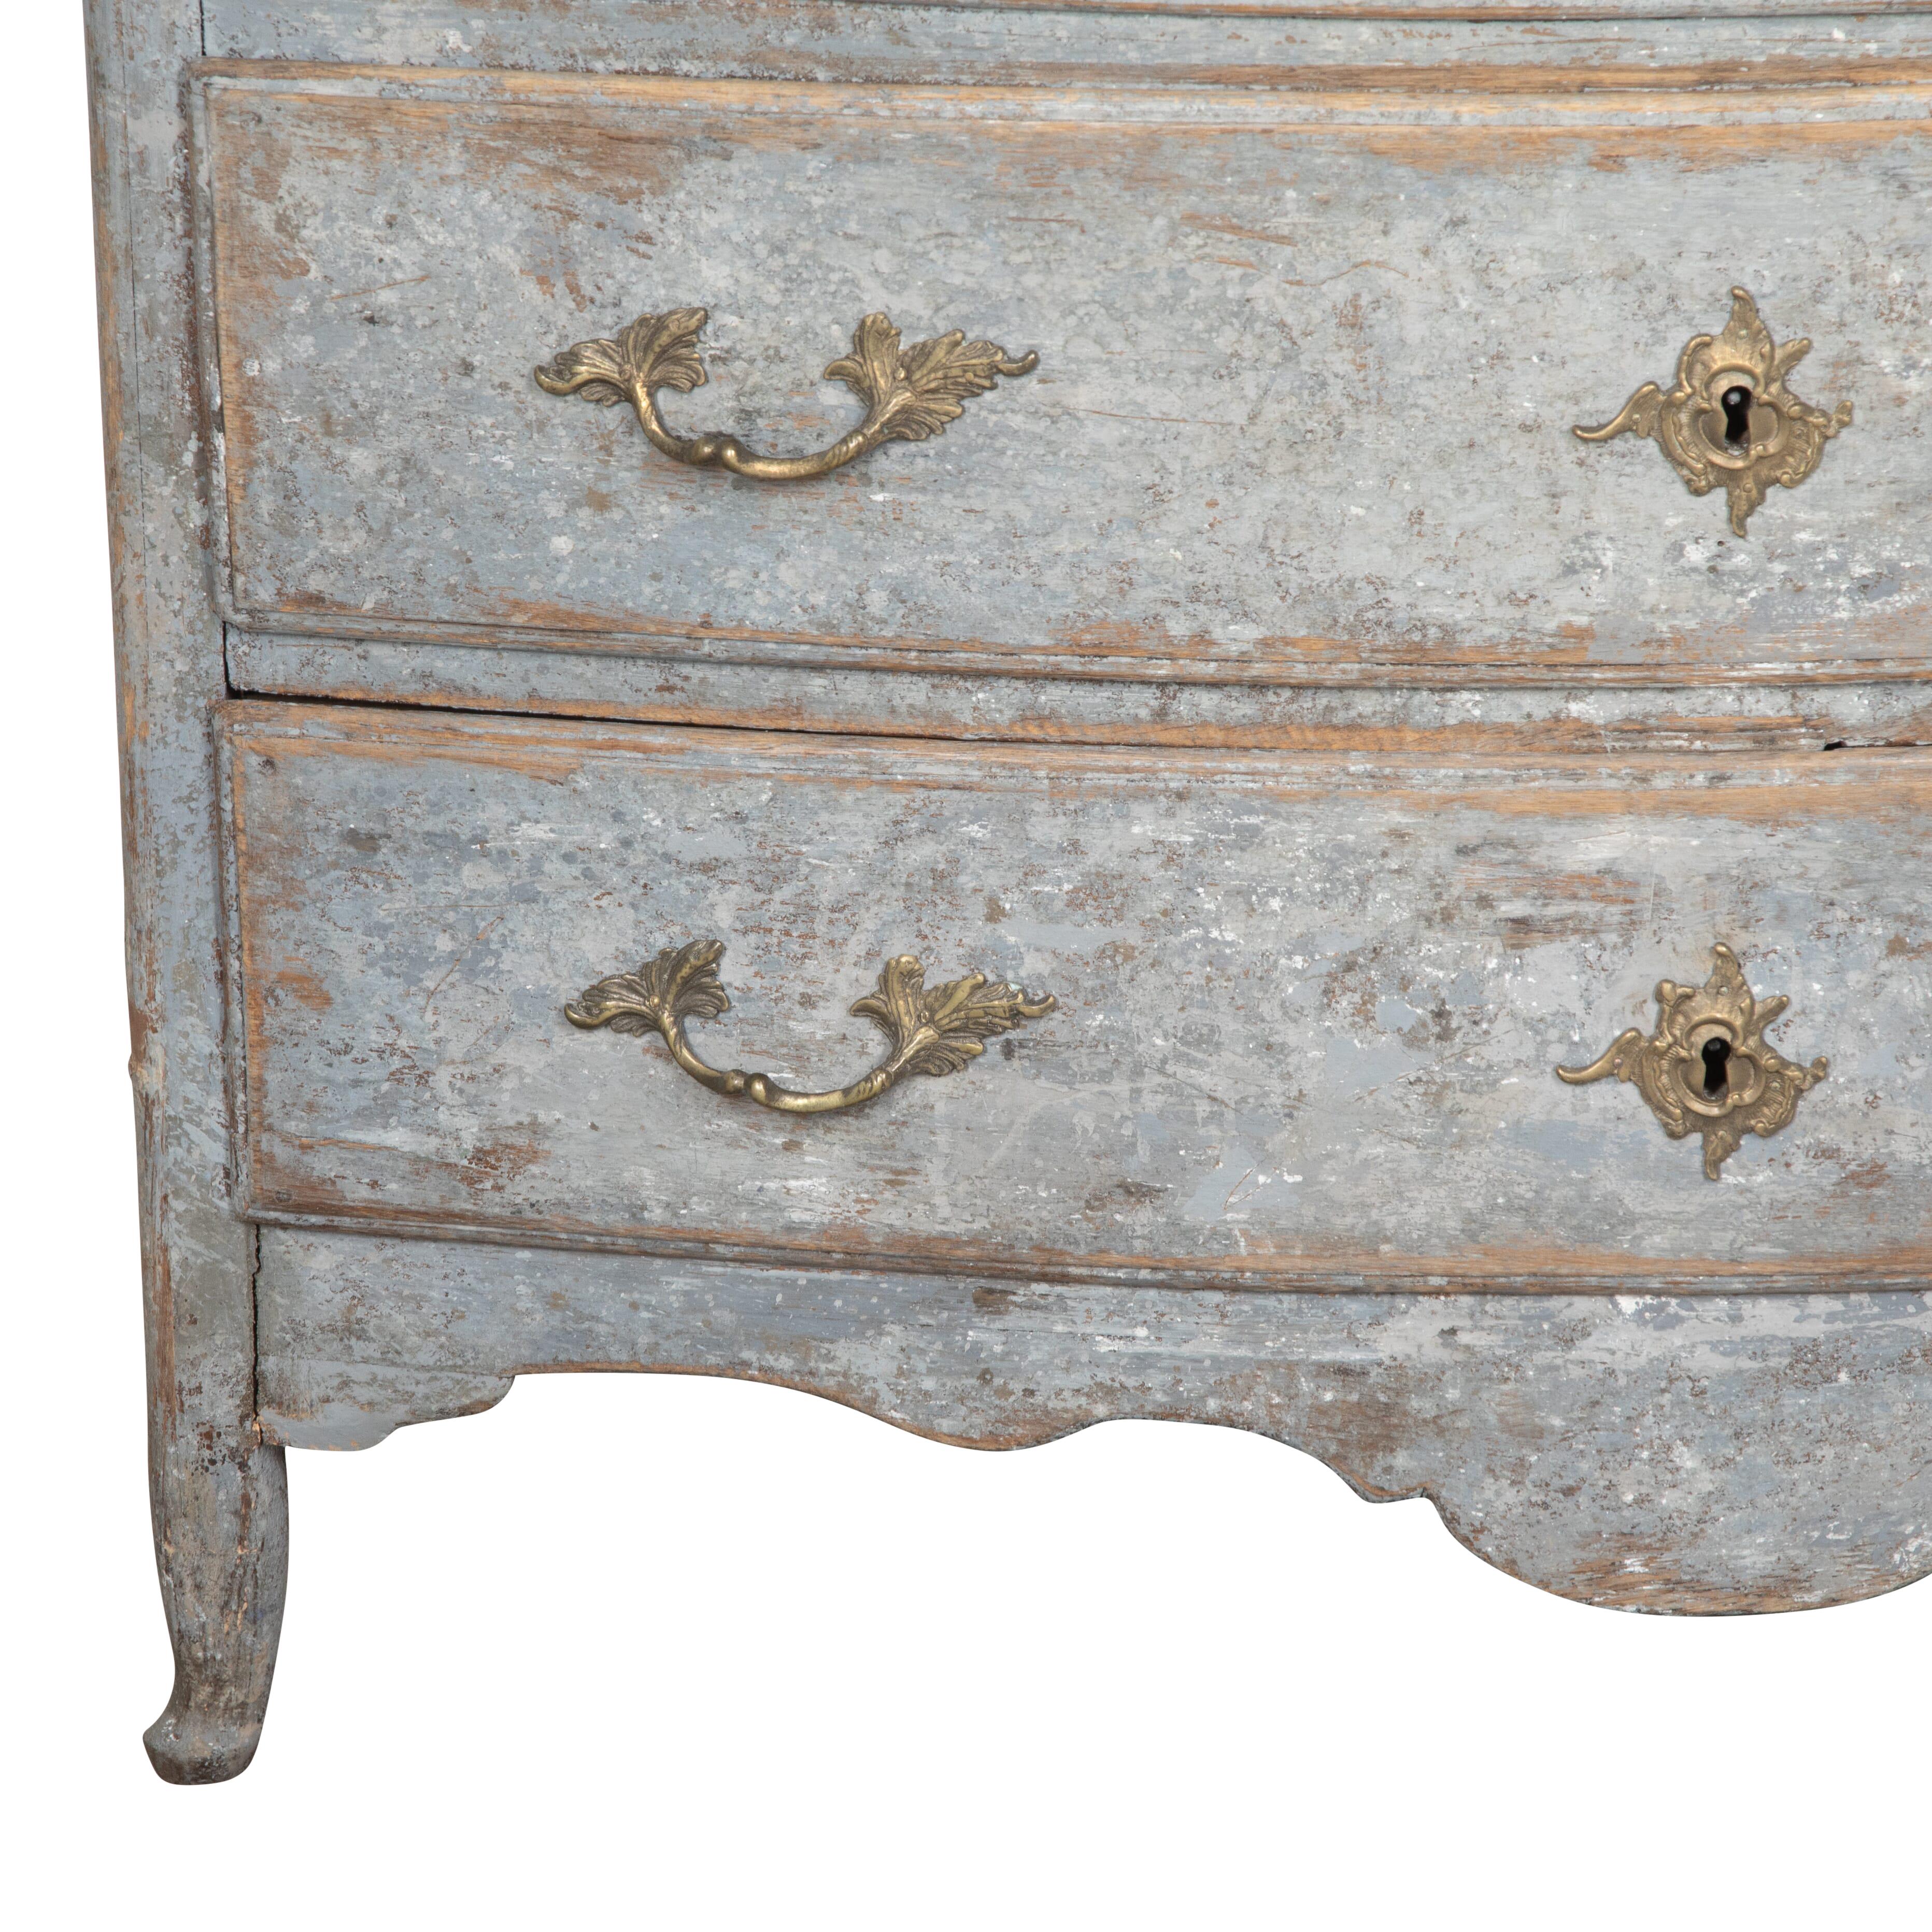 Period three drawer commode.
With a bow front, this Rococo commode has been repainted in blue.
Circa 1770.